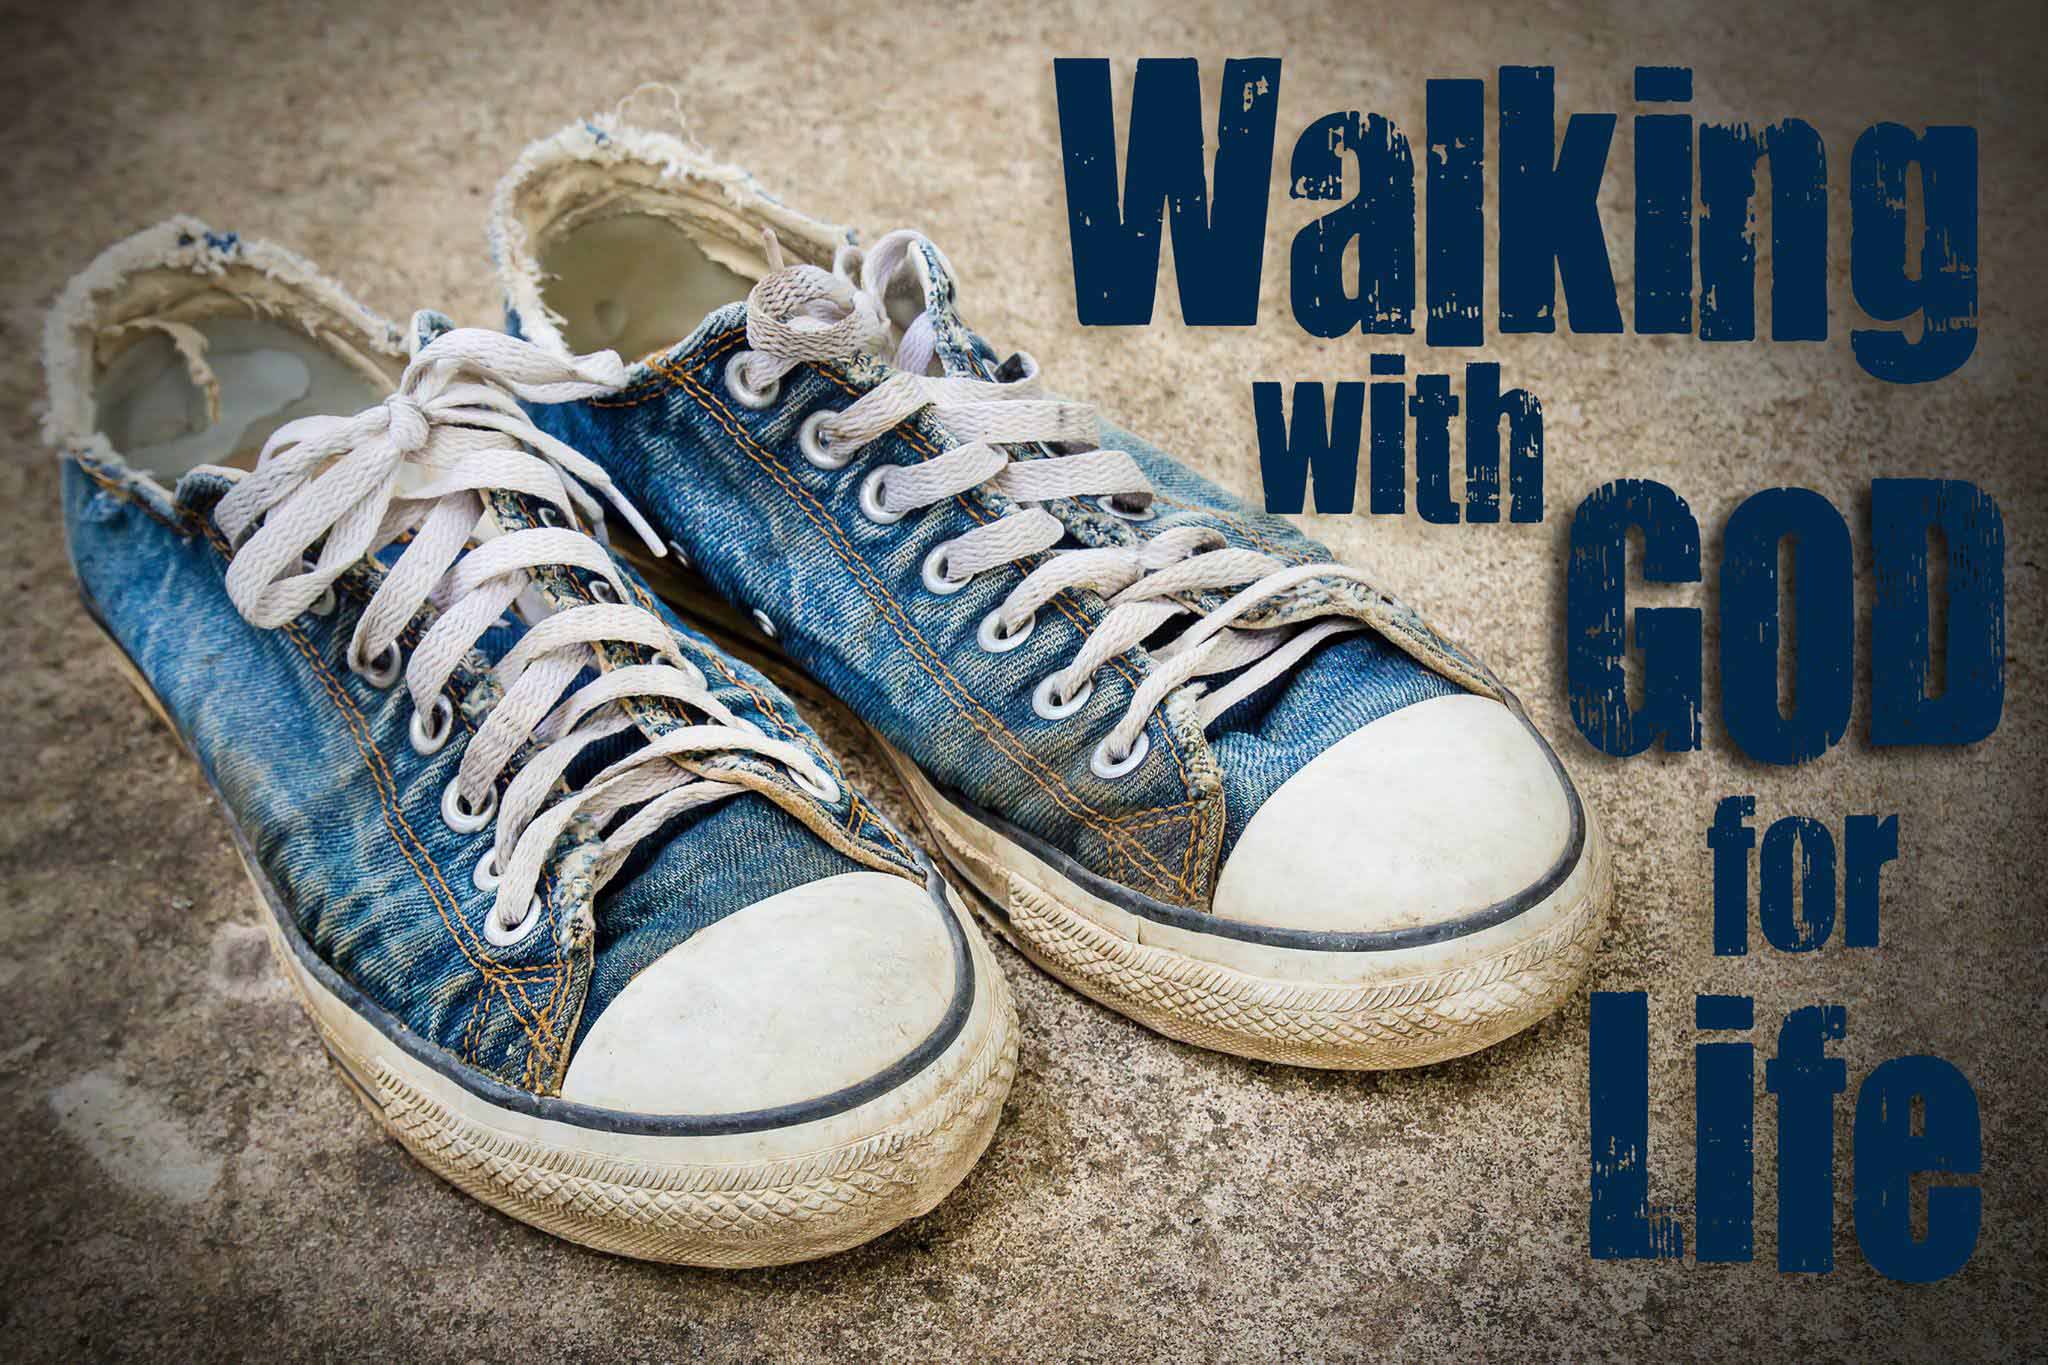 07-19-15 Walking with God for Life